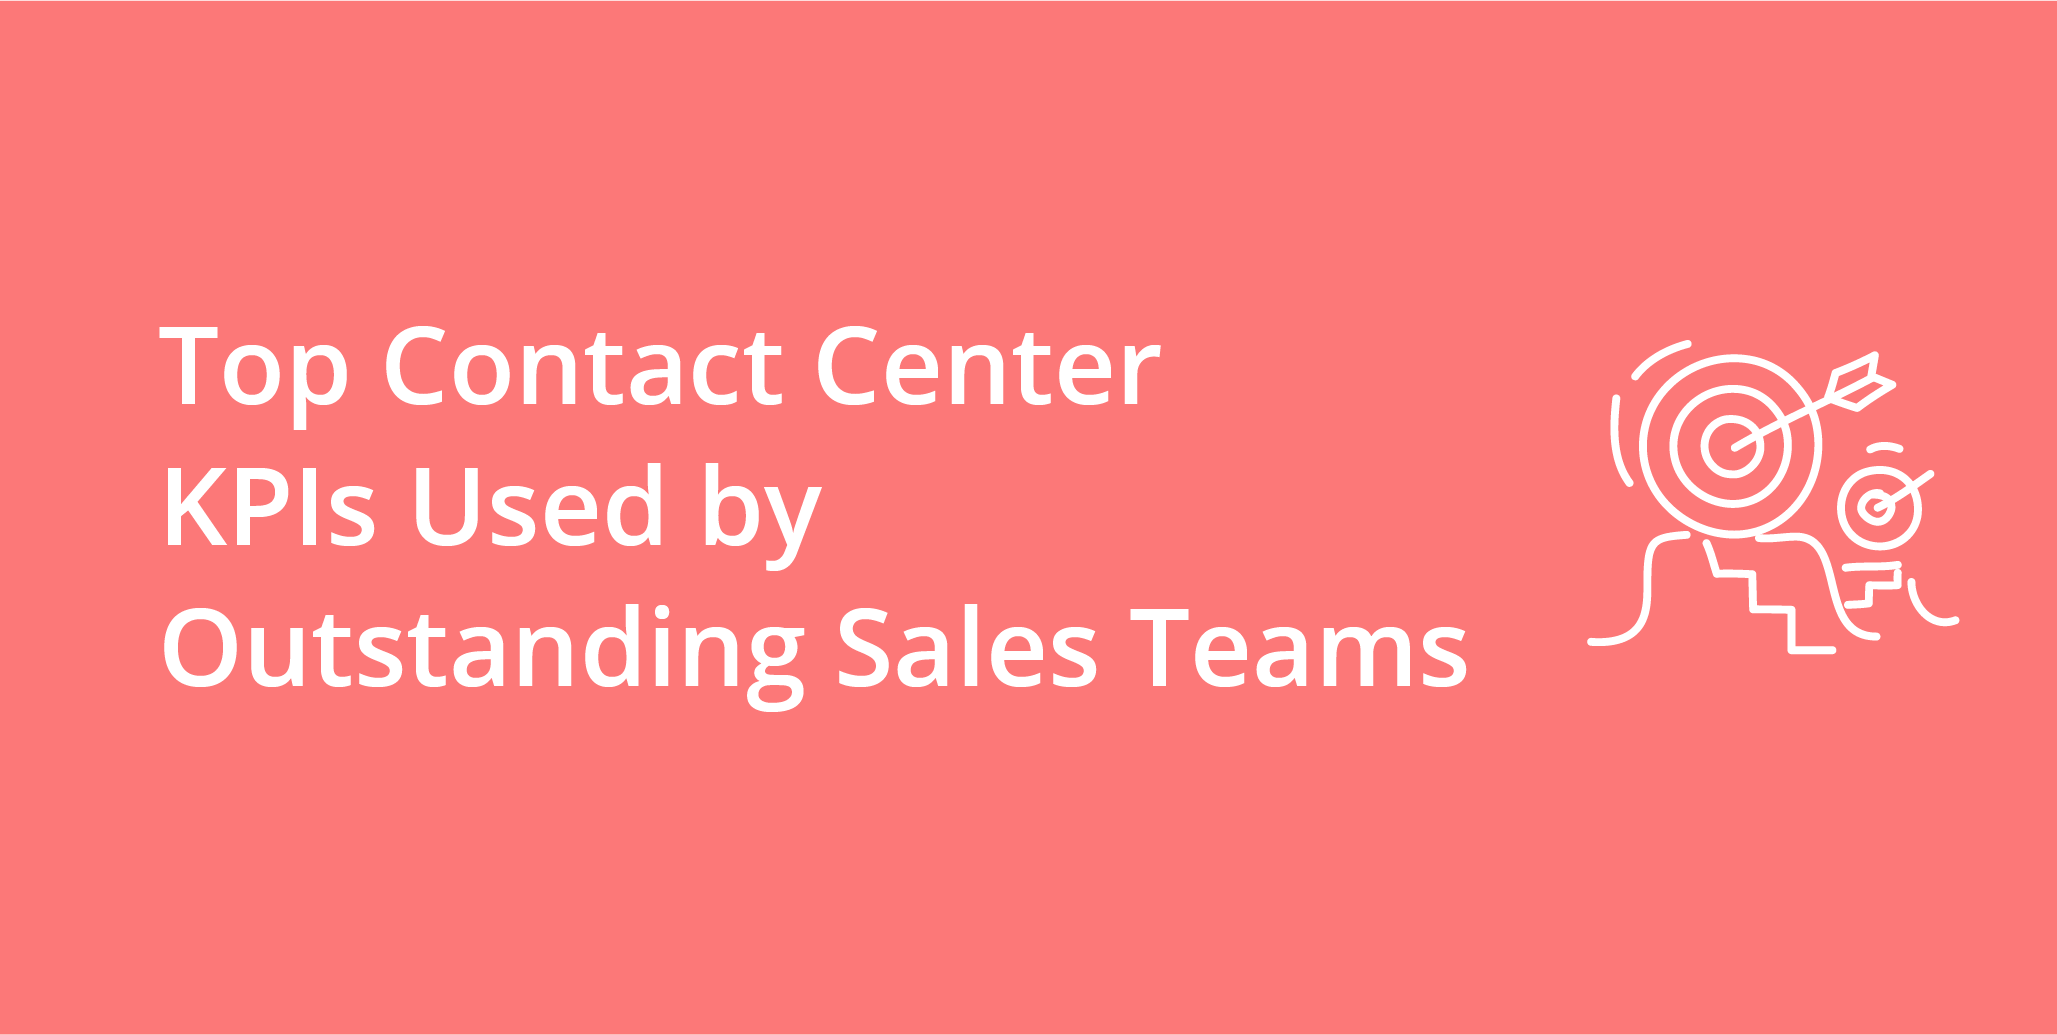 Top Contact Center KPIs Used by Outstanding Sales Teams | Telephones for business